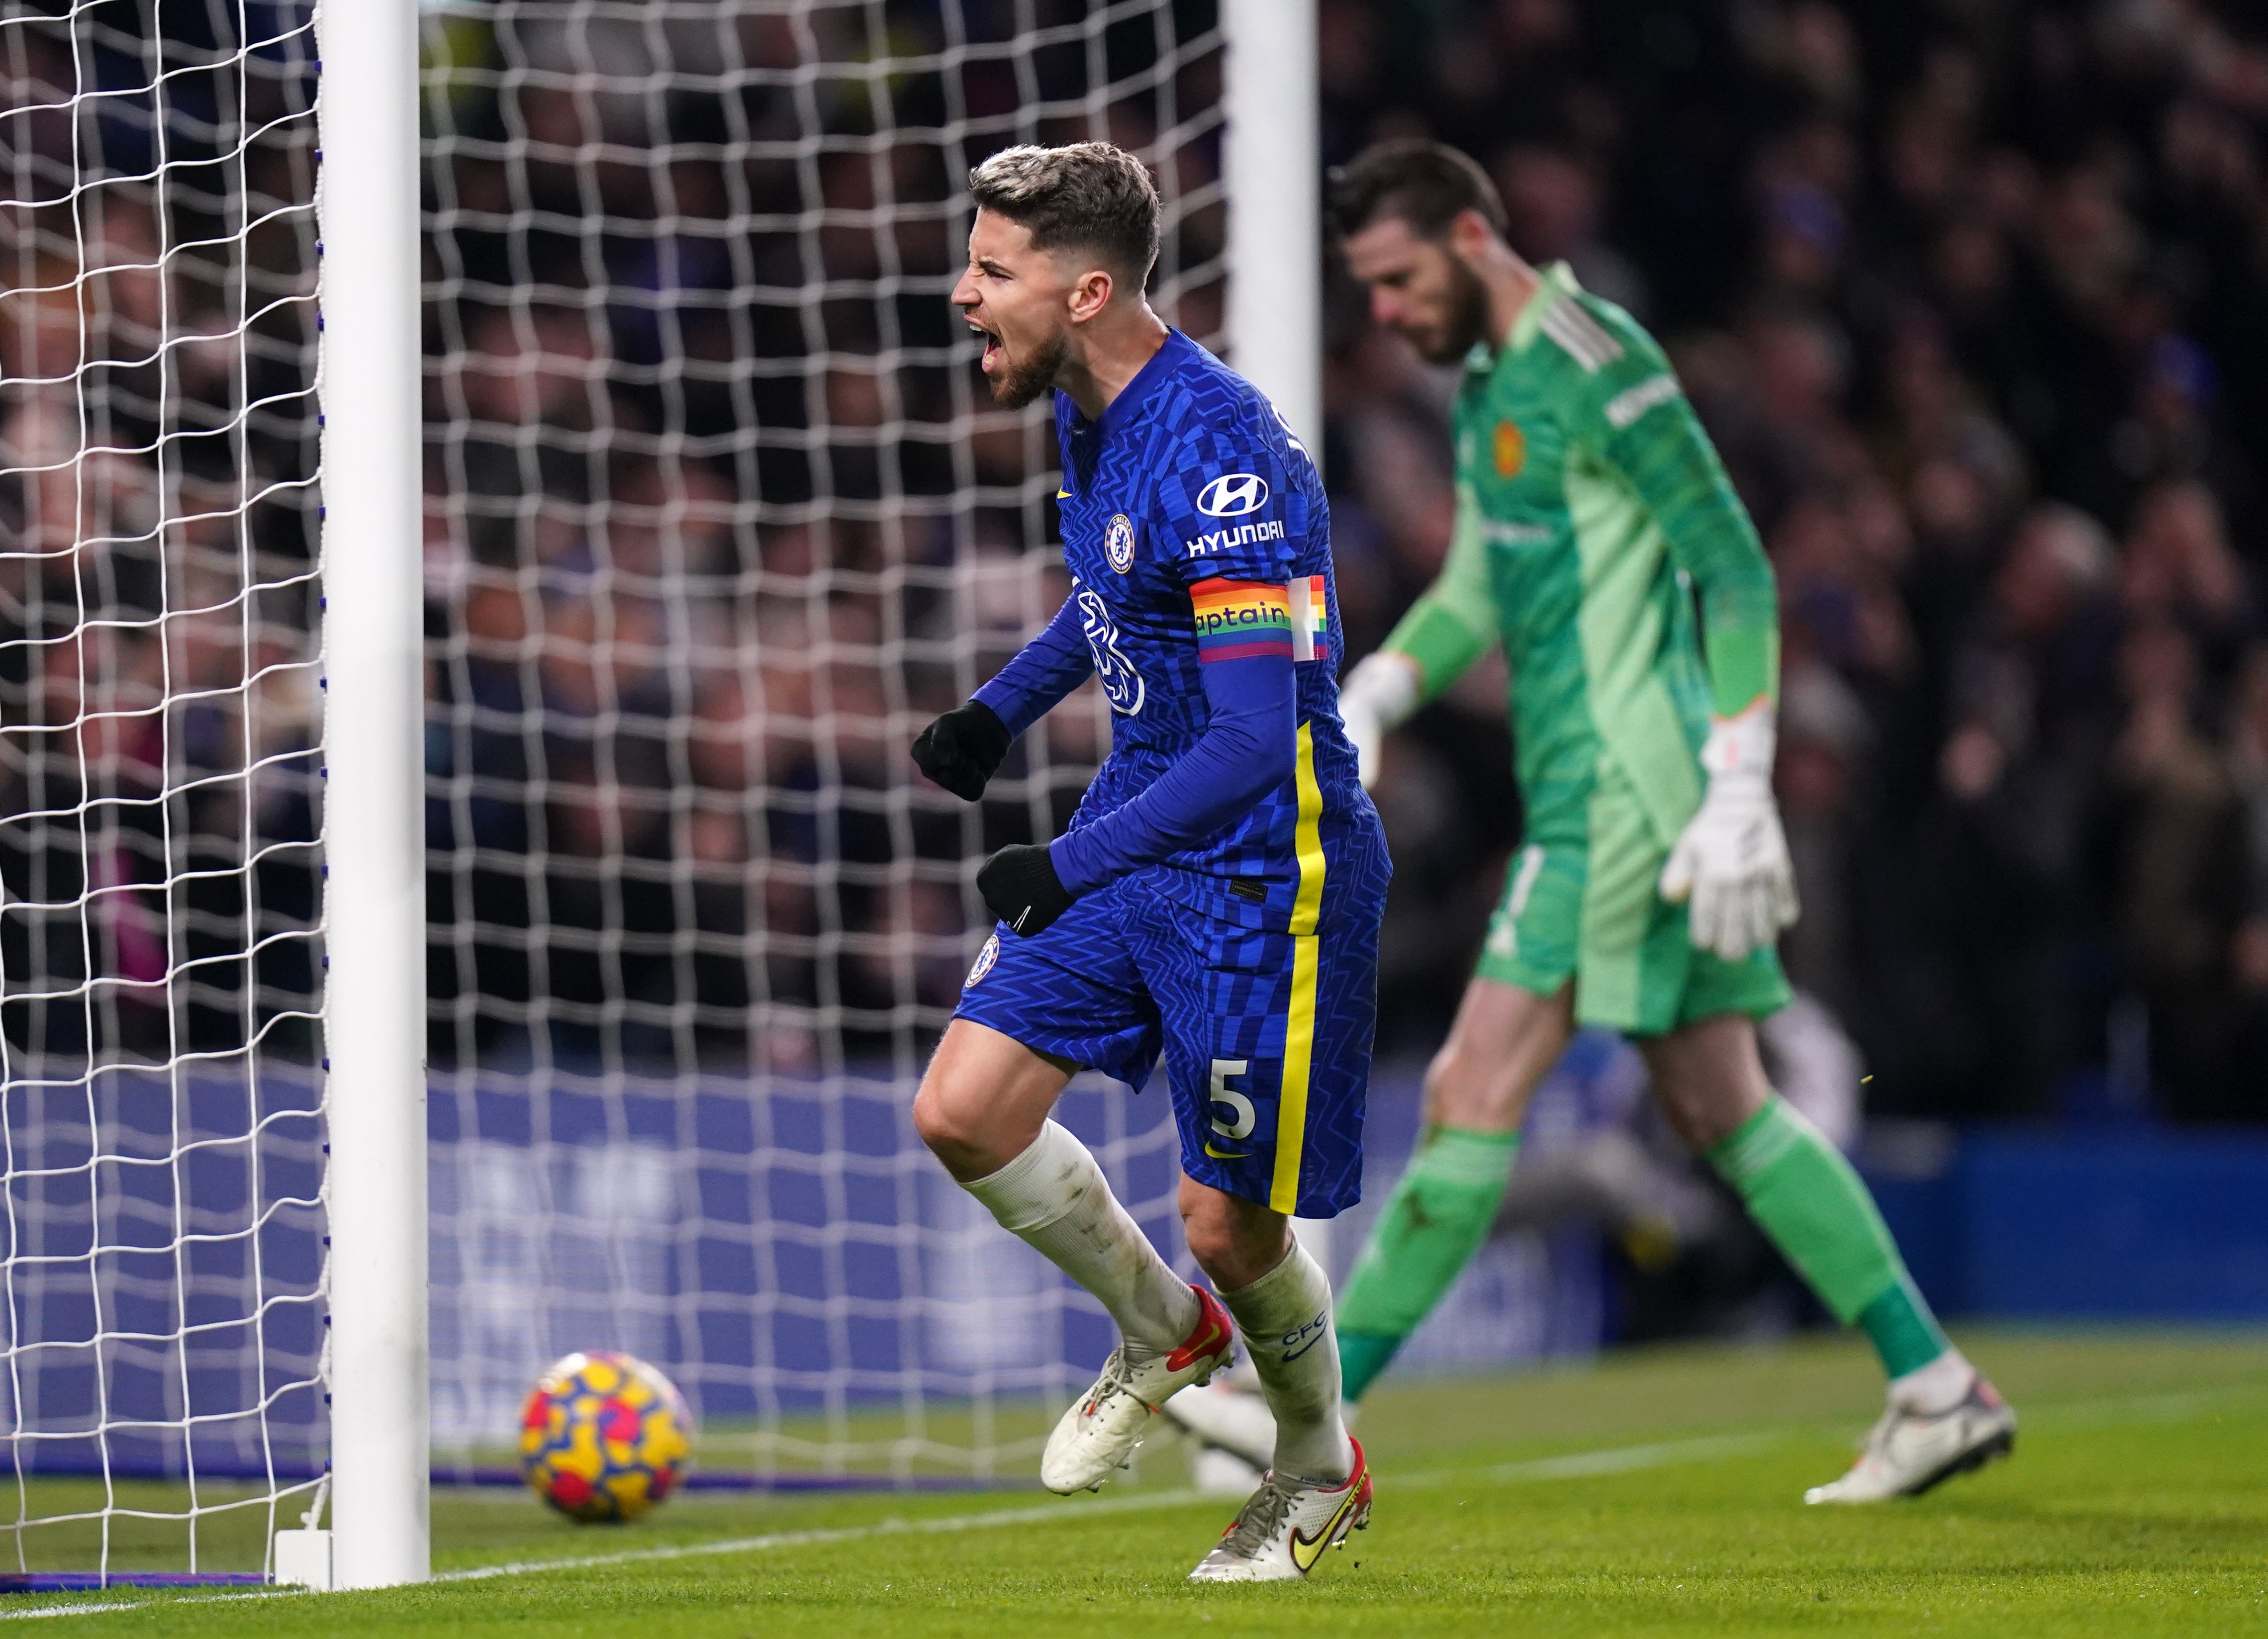 Jorginho made up for a defensive blunder to slot home a penalty as Chelsea recovered to draw 1-1 with Manchester United at Stamford Bridge (Adam Davy/PA)